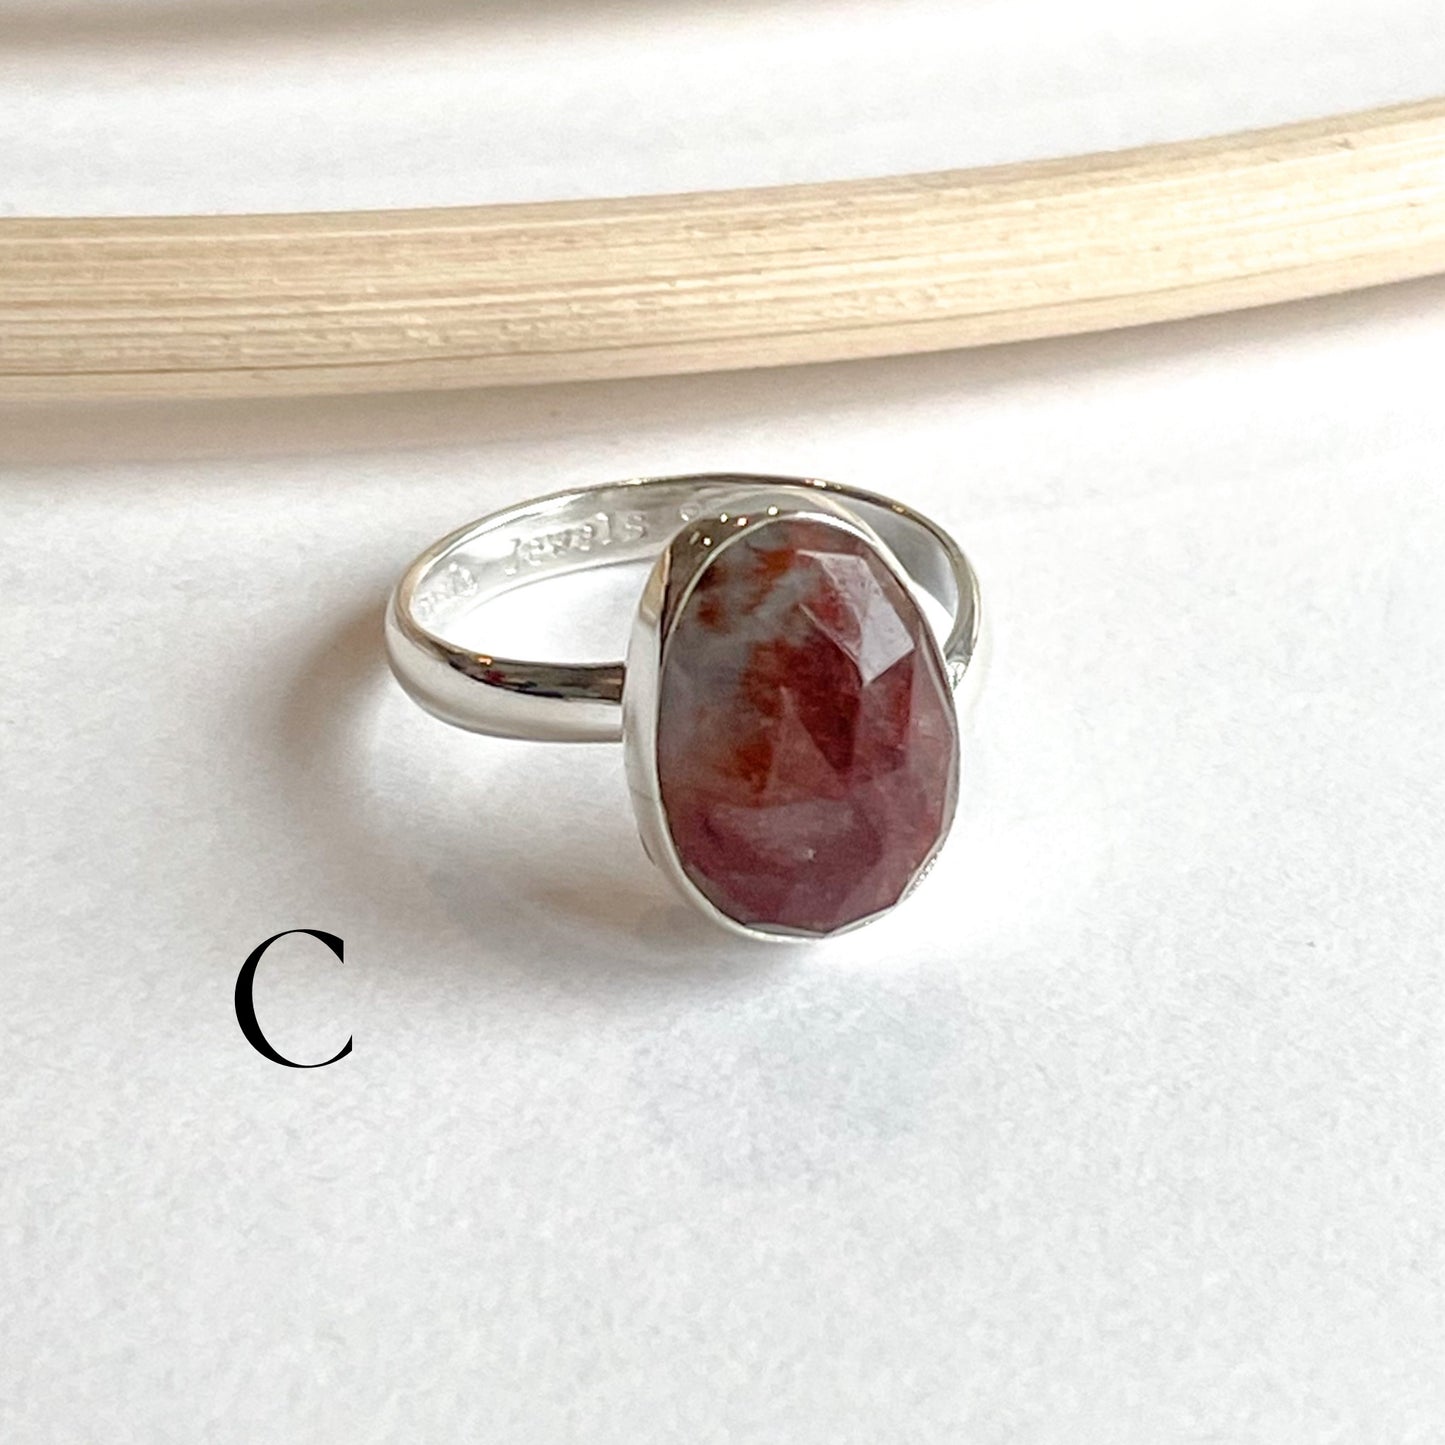 Blood Aquamarine Ring - Solid Sterling Silver